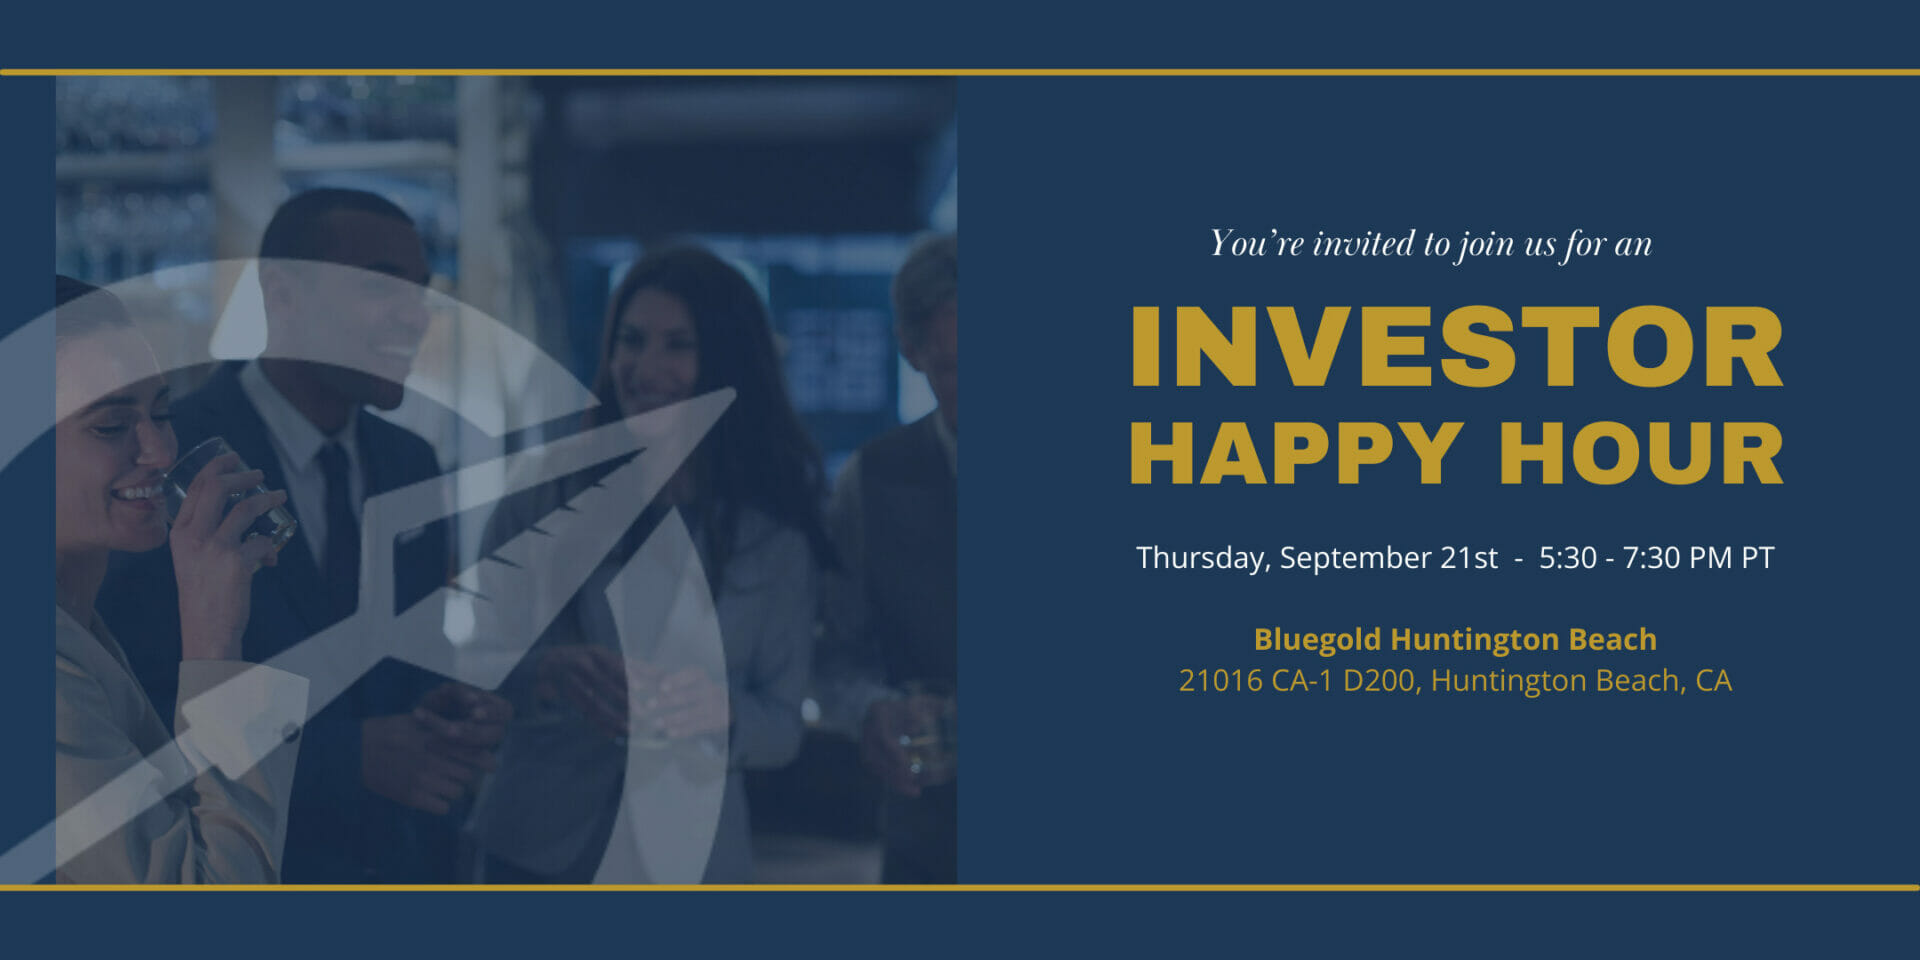 image for Investor Happy Hour